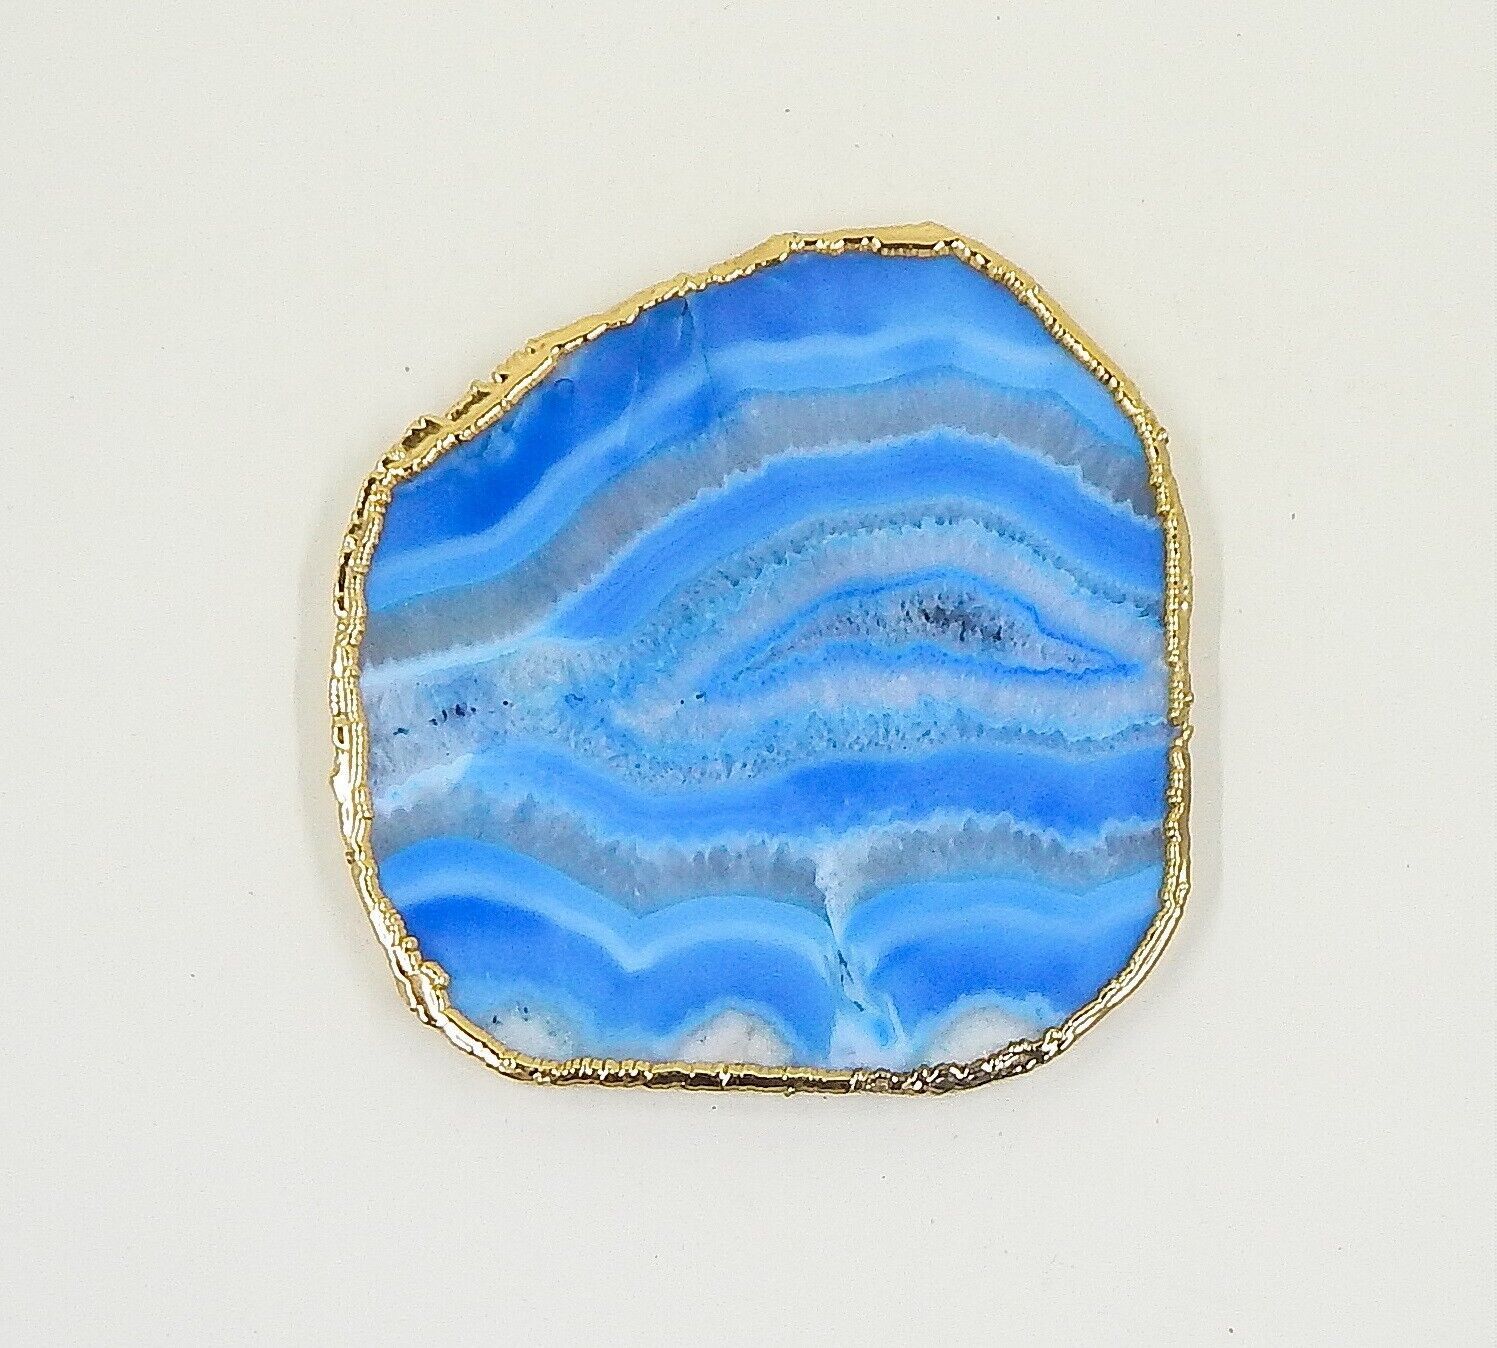 Sliced Agate Geode Candle Plate Gold Trimmed Anthropologie - $45.99